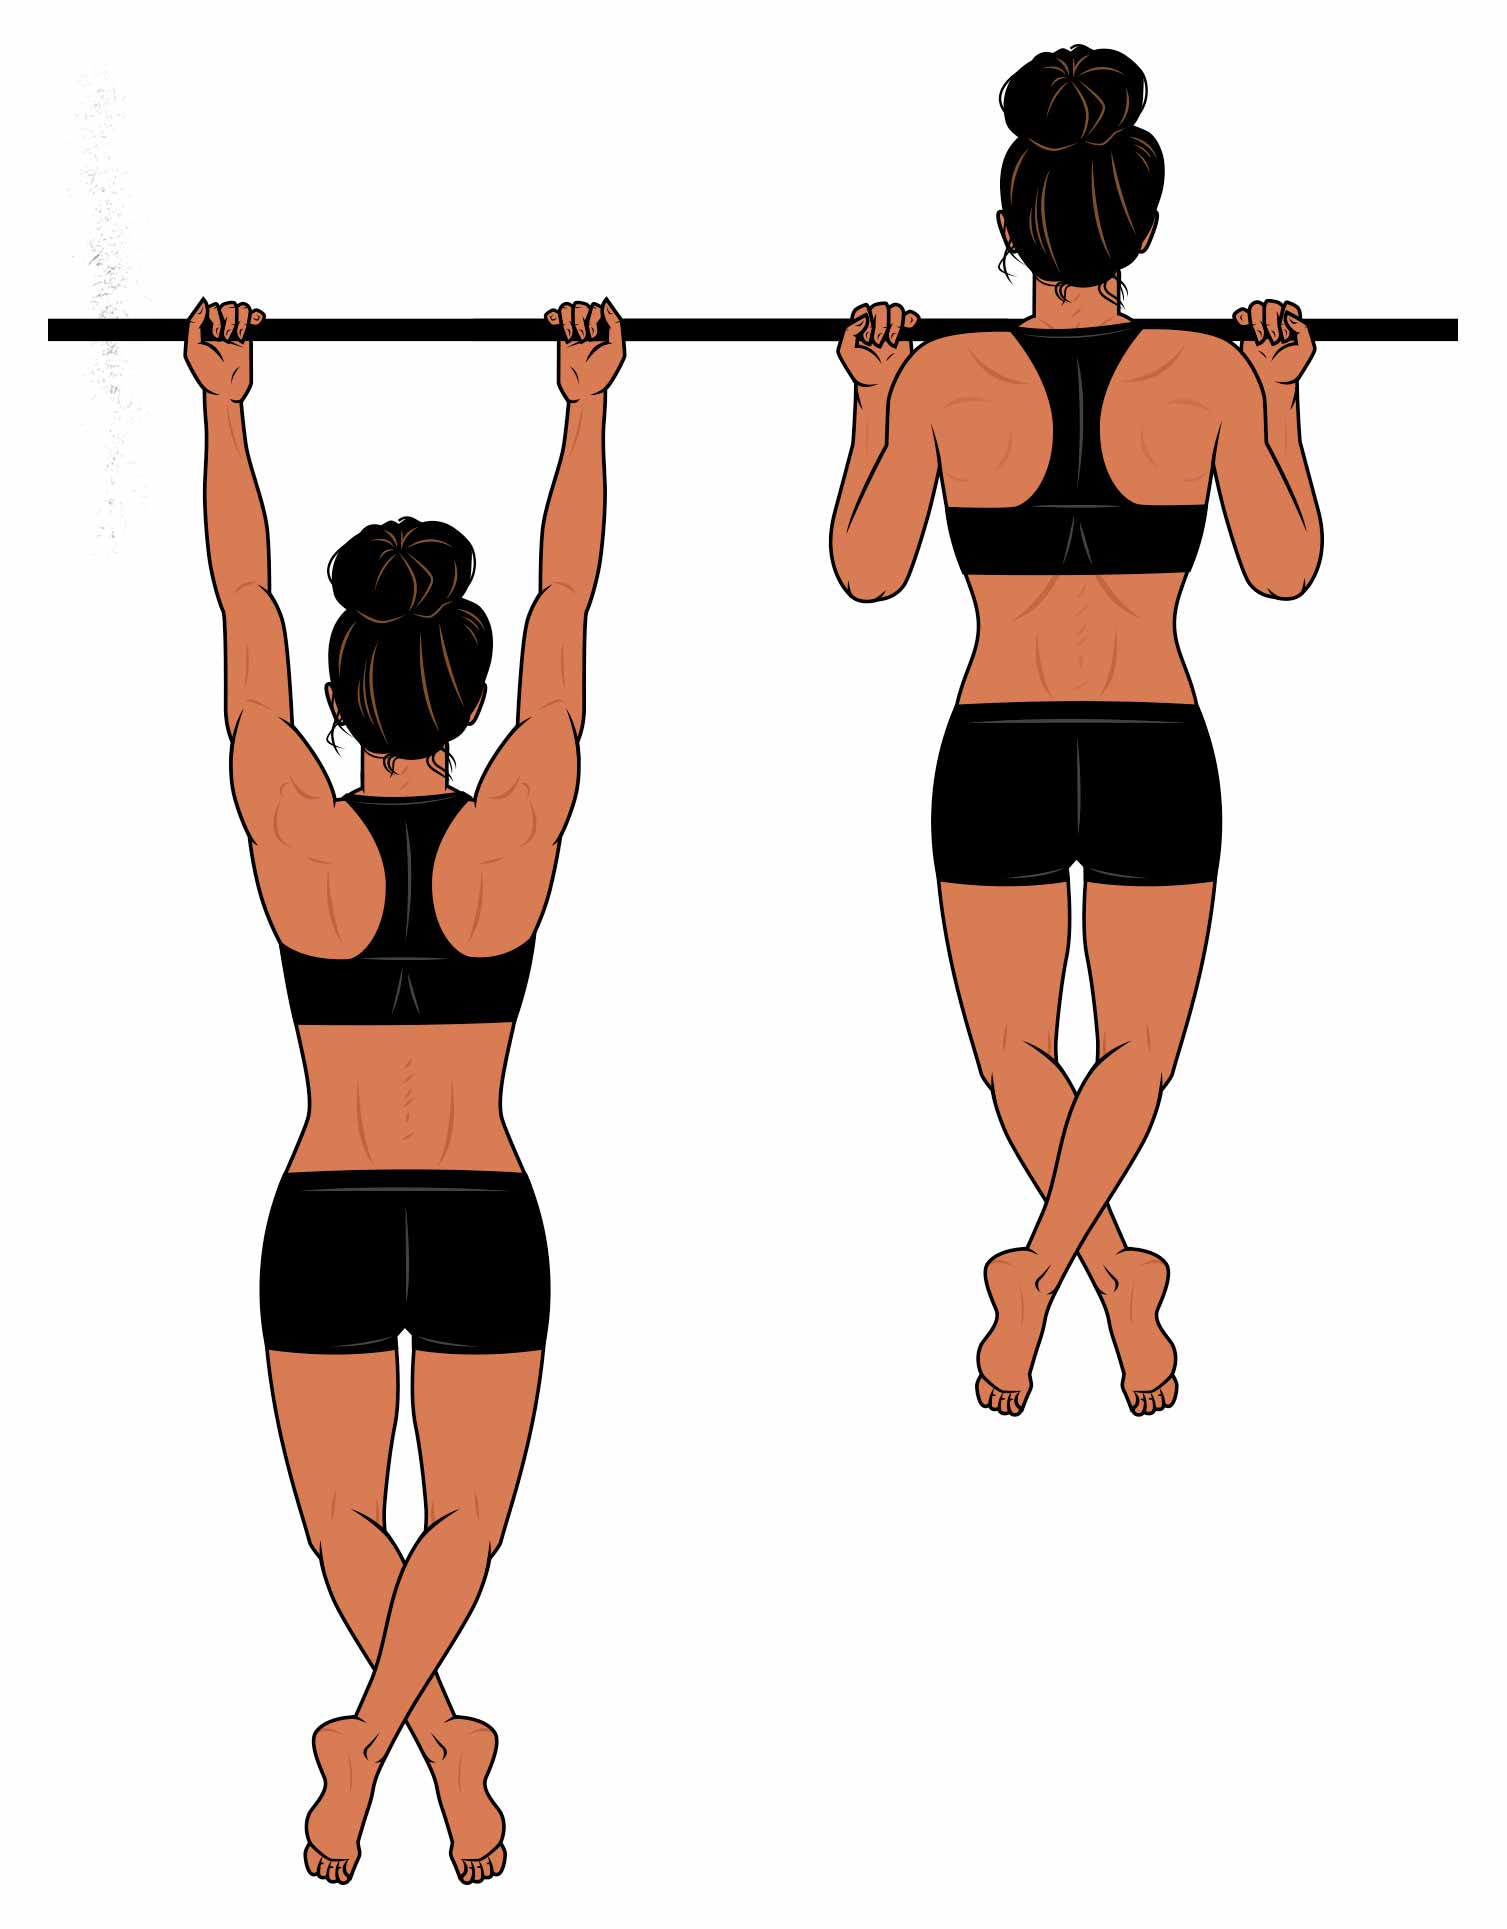 Outlift illustration of a woman doing chin-ups to build muscle.